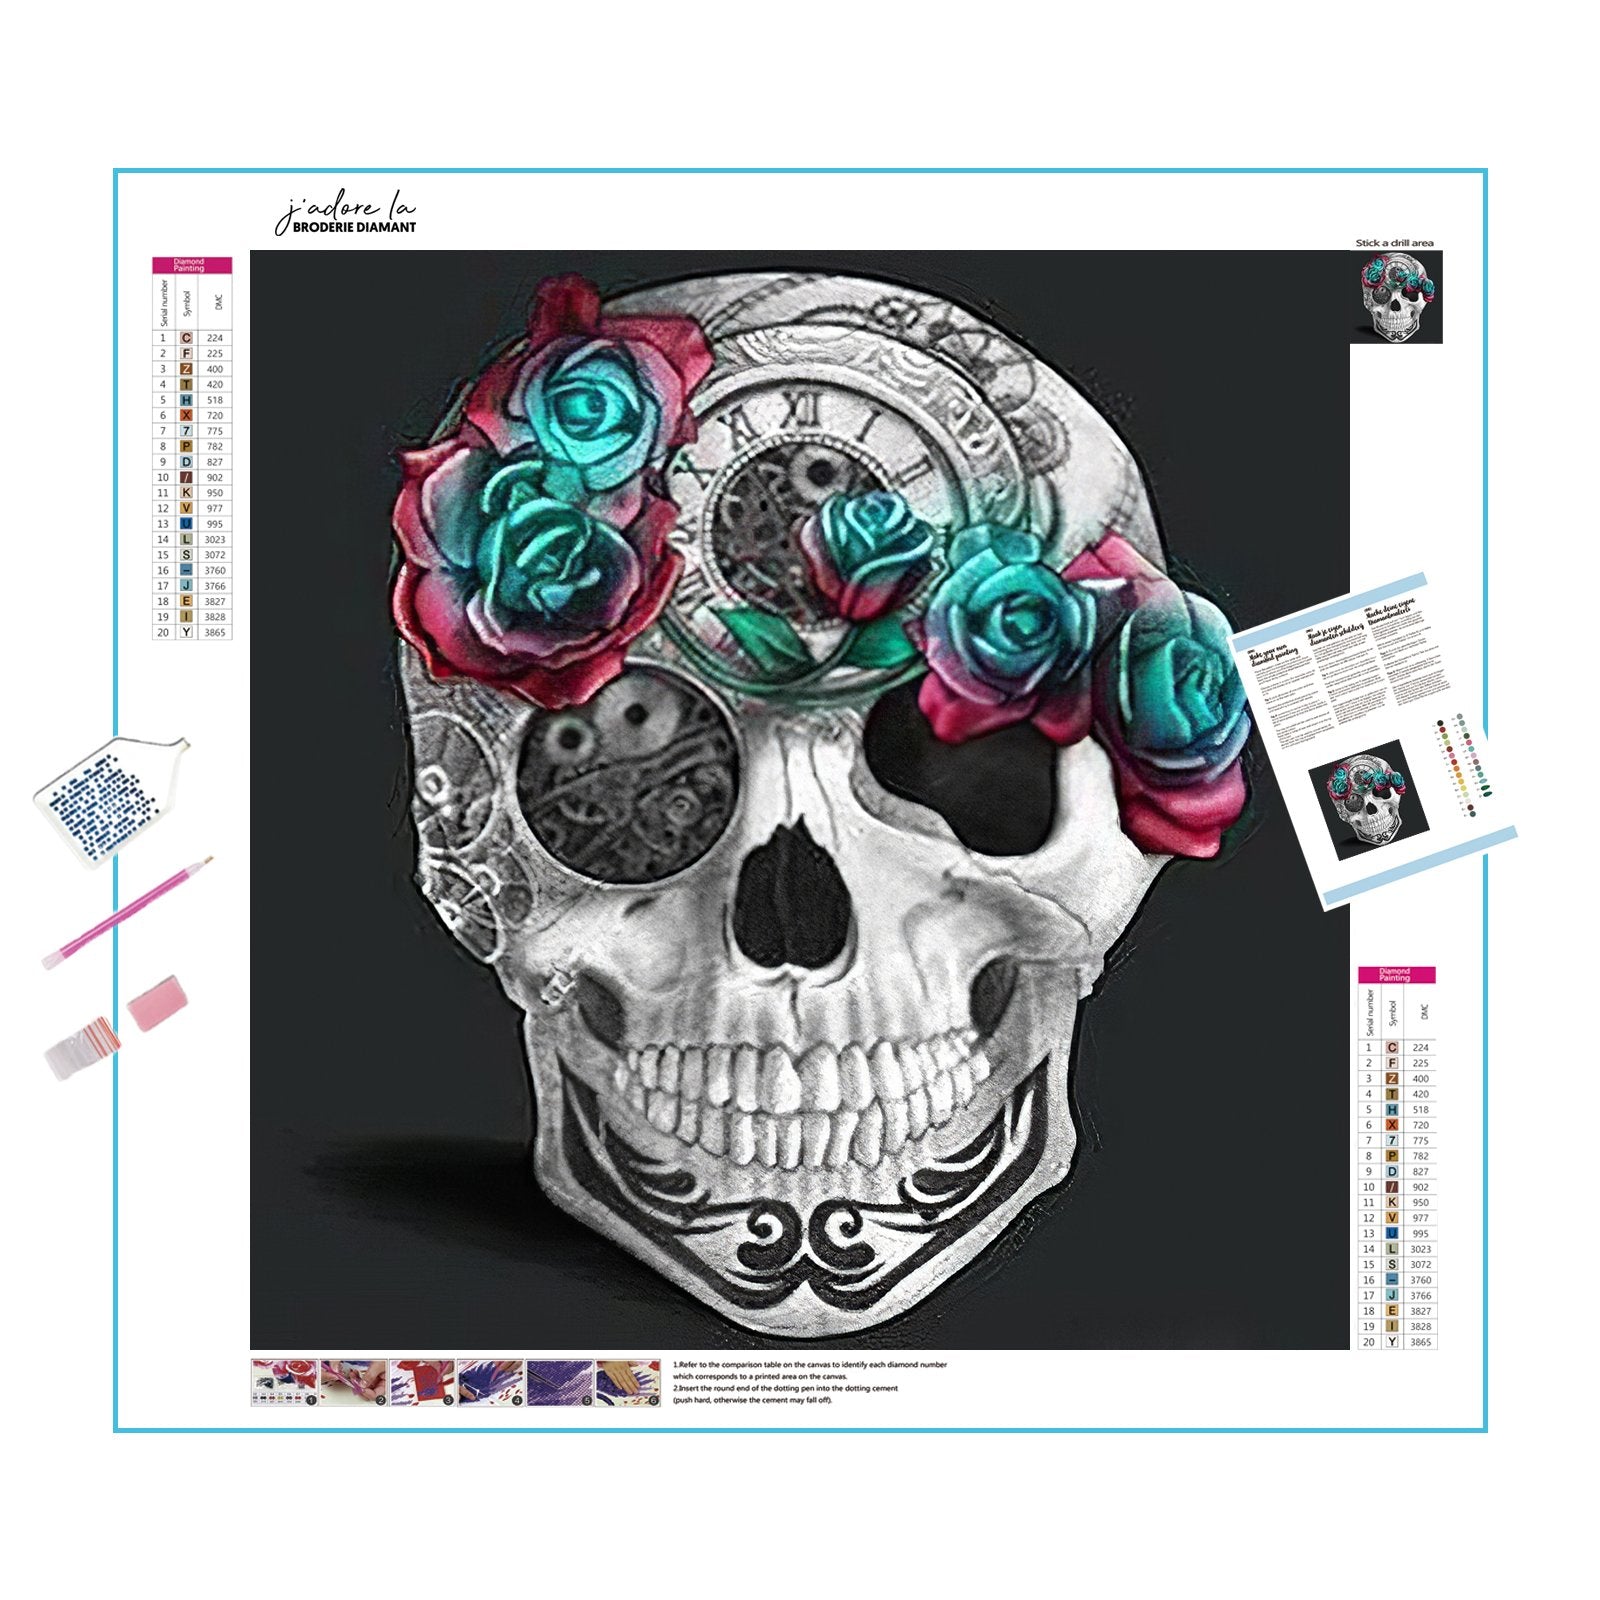 A Skull Decorated with Roses: Edgy elegance intertwined with floral beauty. A Skull Decorated With Roses - Diamondartlove